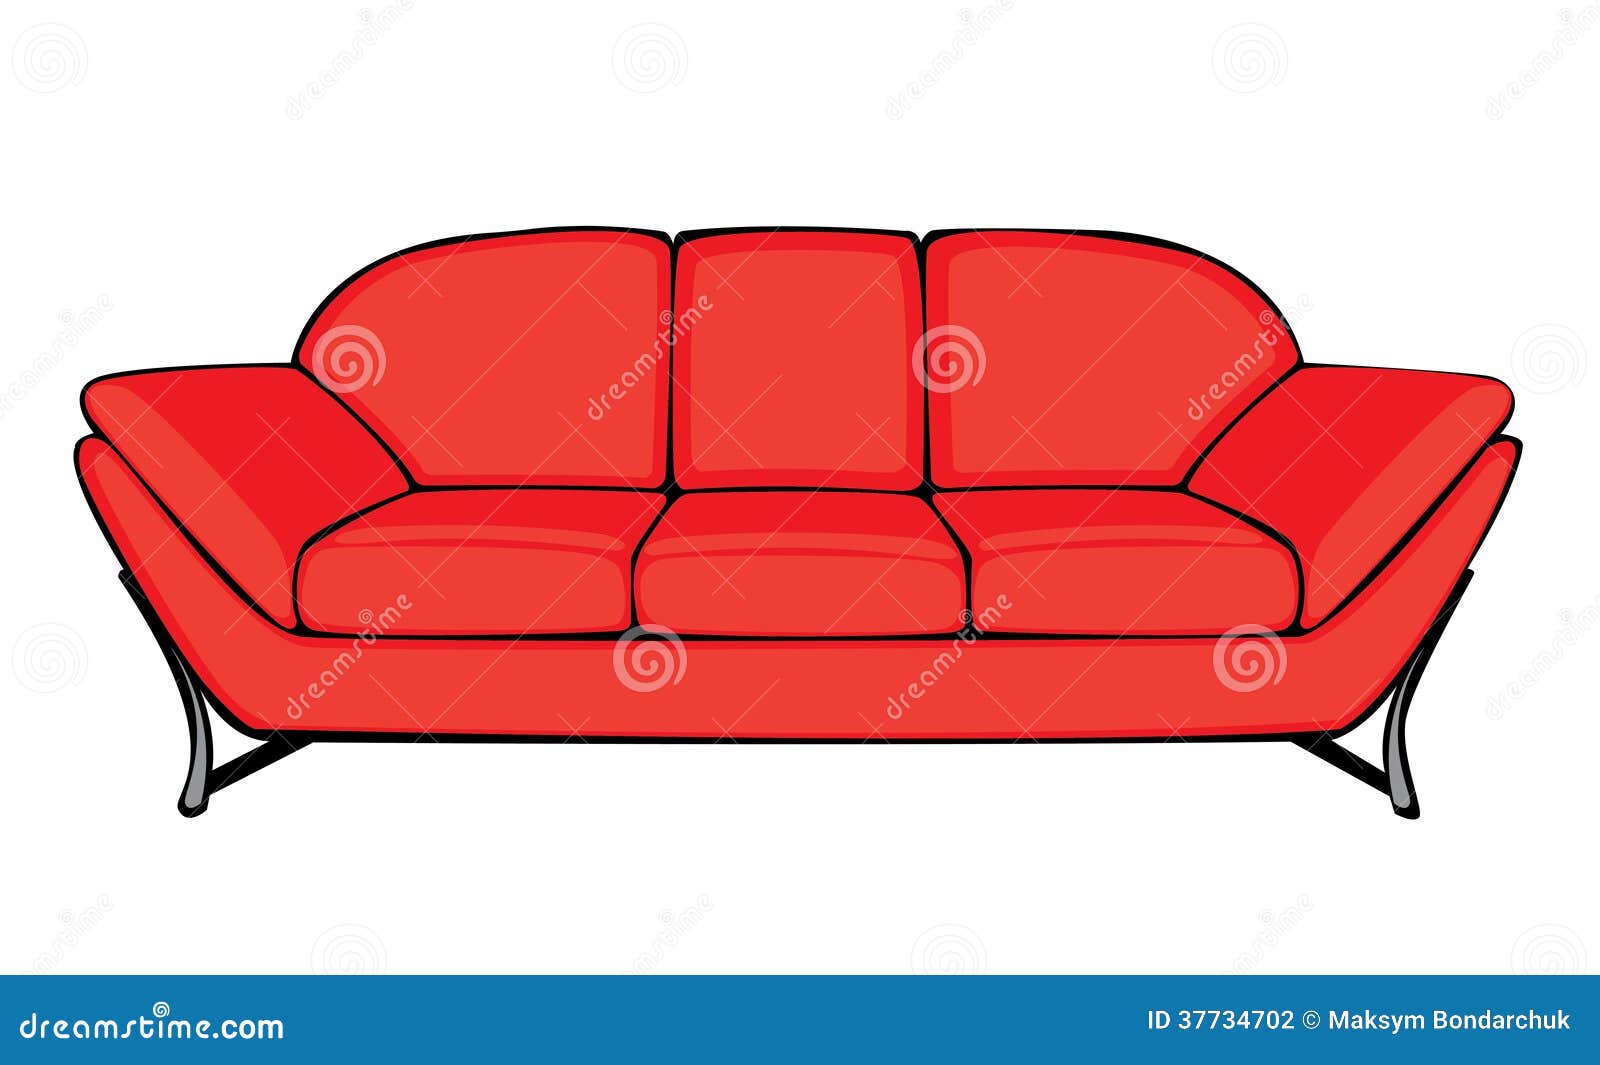 Cartoon Sofa Images Reverse Search